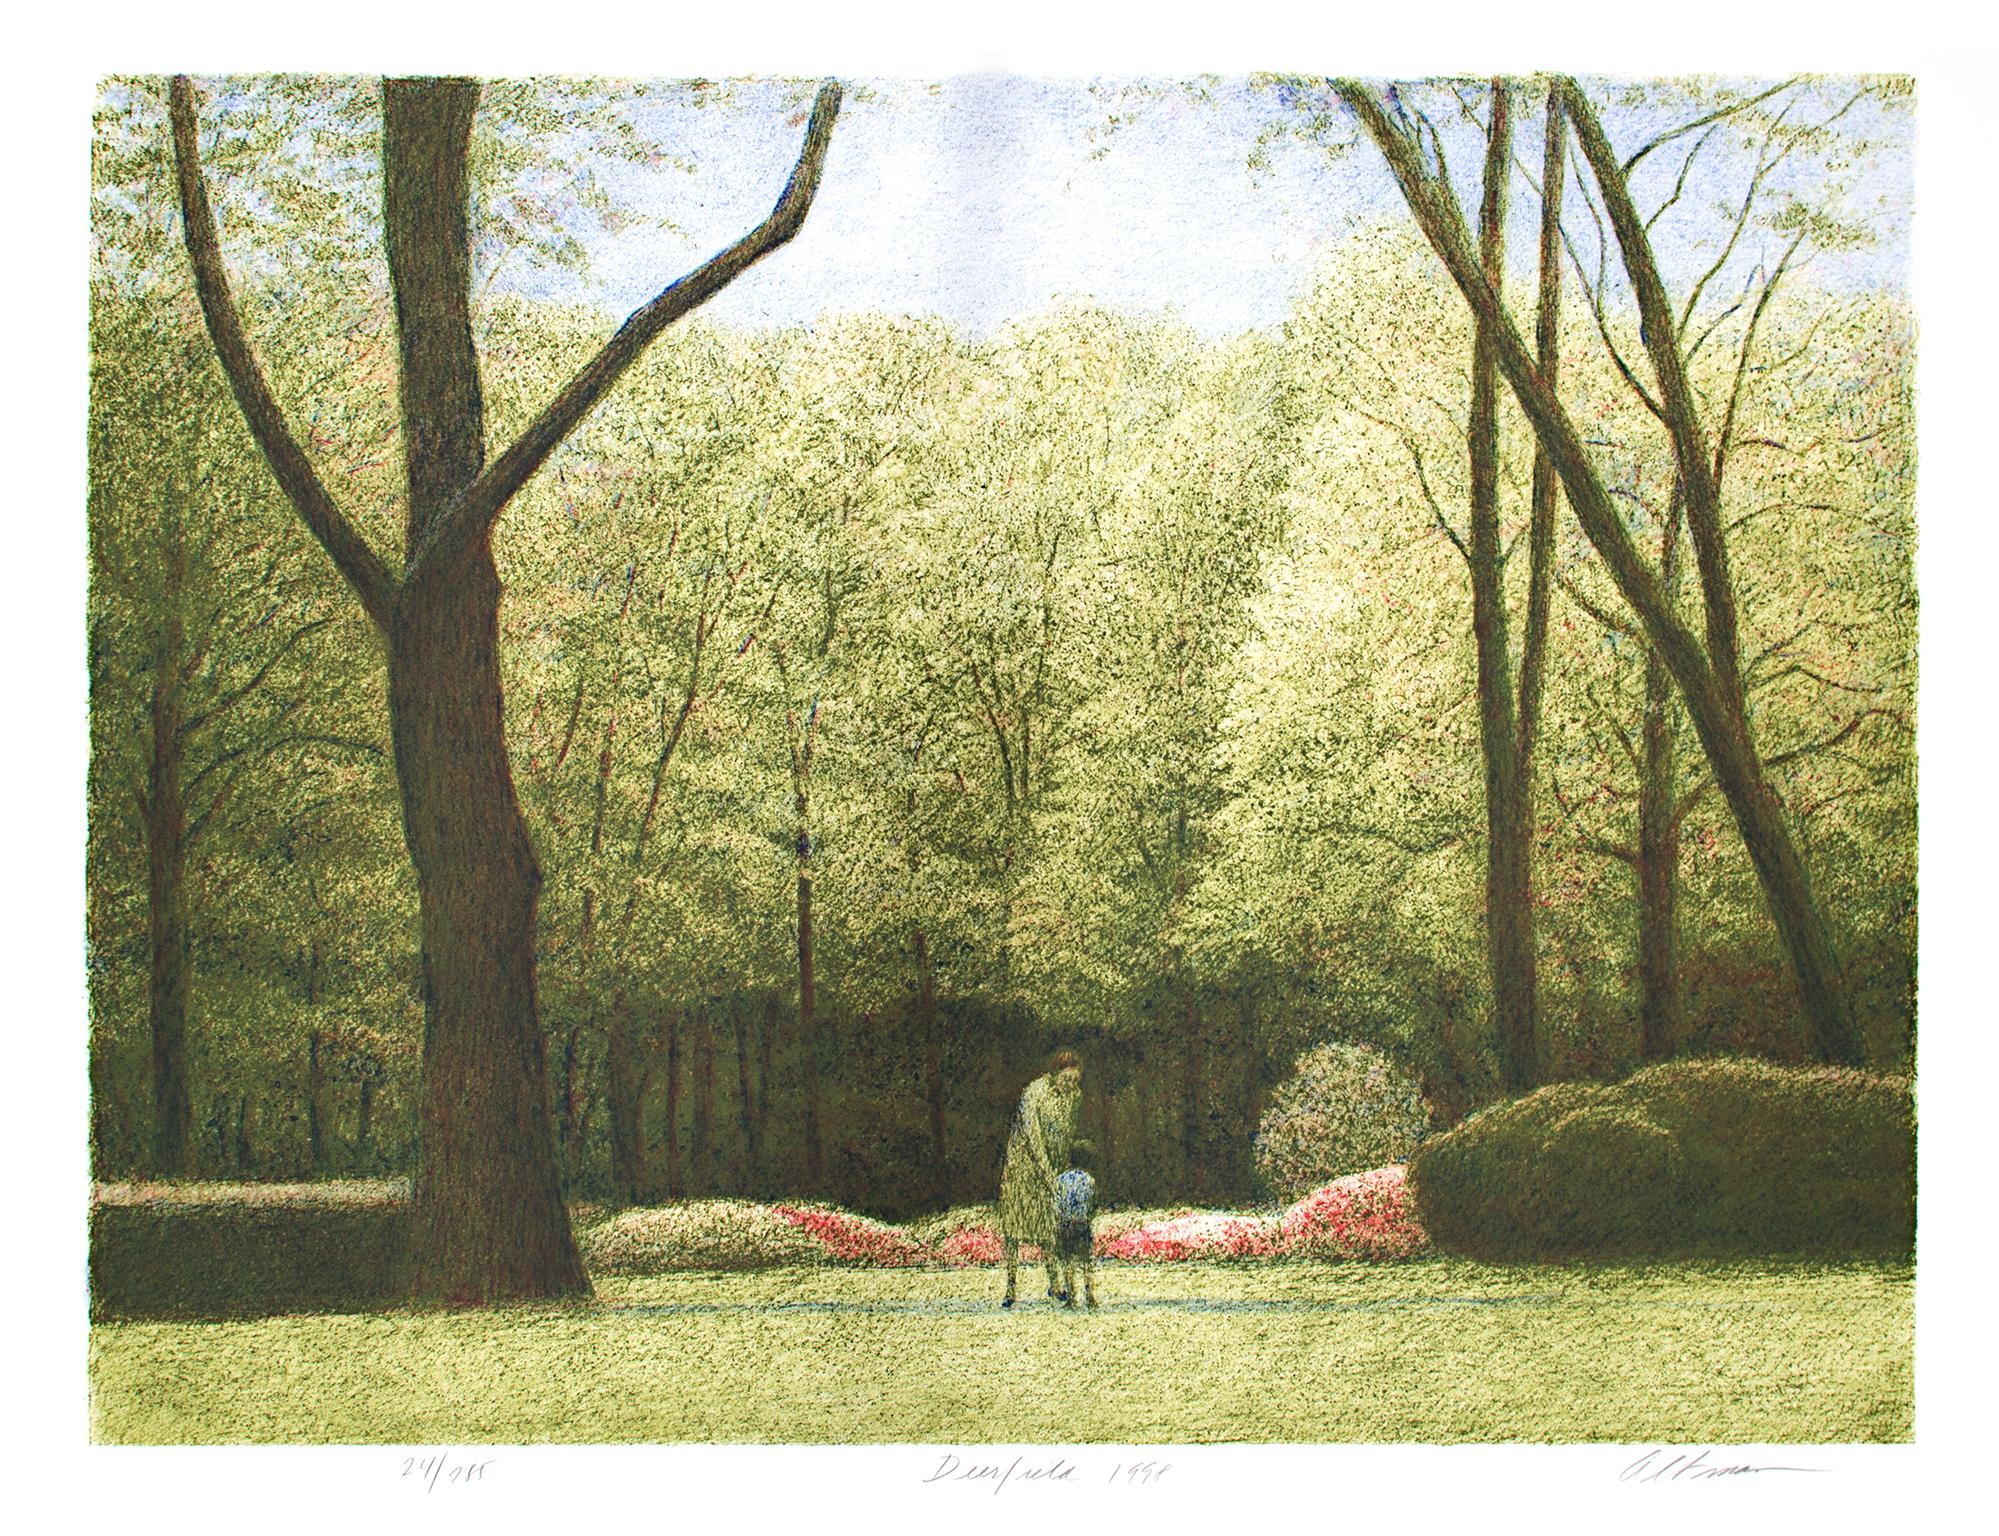 "Deerfield" is an original color lithograph by Harold Altman. It is numbered 24 out of an edition of 285. A bright blue sky looks down on a lush green forest. Within the lawn, a mother and son are seen together. Flowers add a bright pop of red